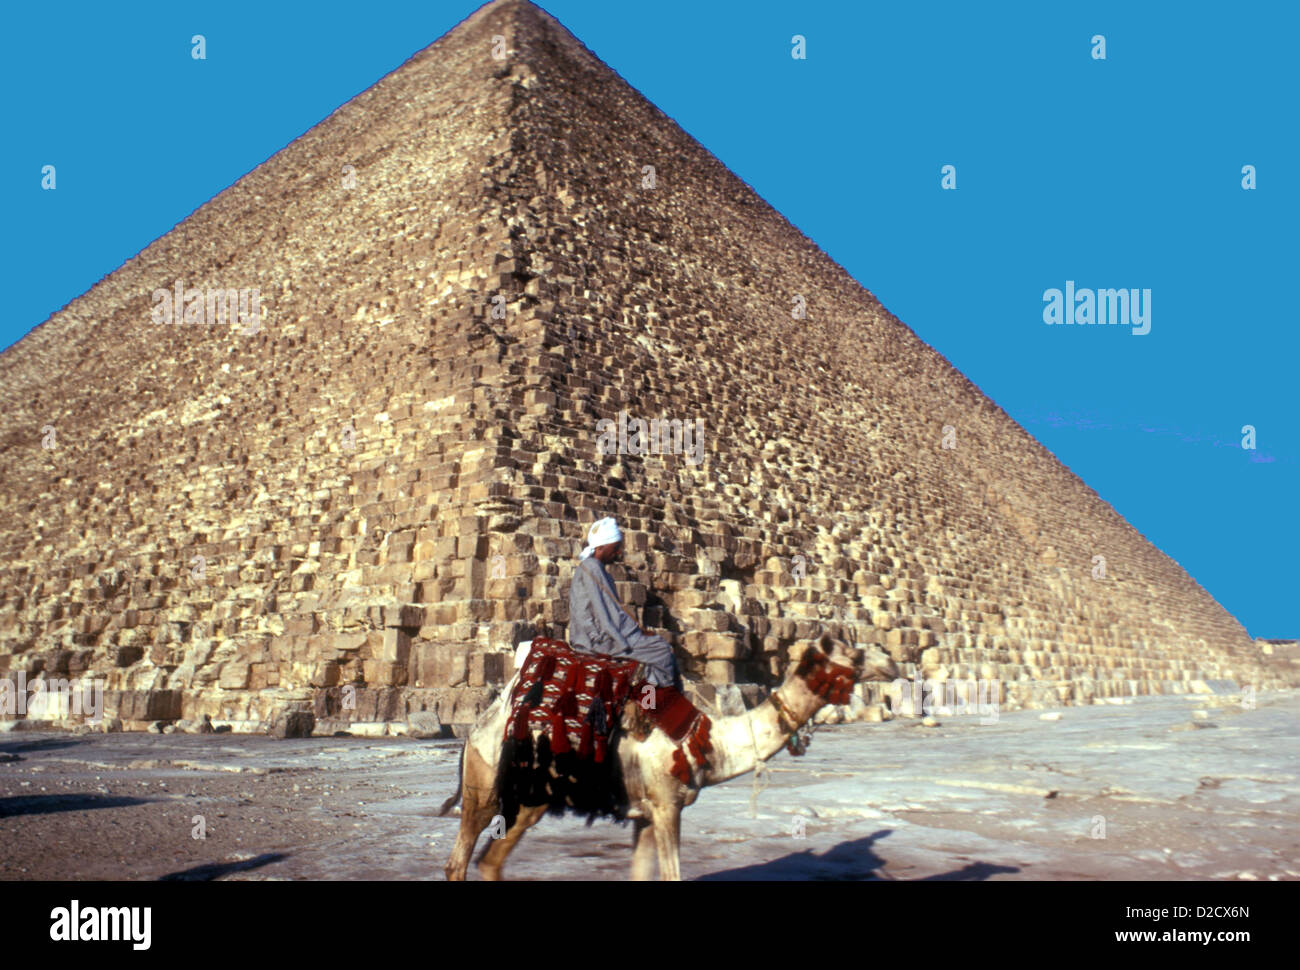 Camel-rider passing Cheops pyramid in  Giza Egypt. Limestone, dated from 2560 BCE. Stock Photo